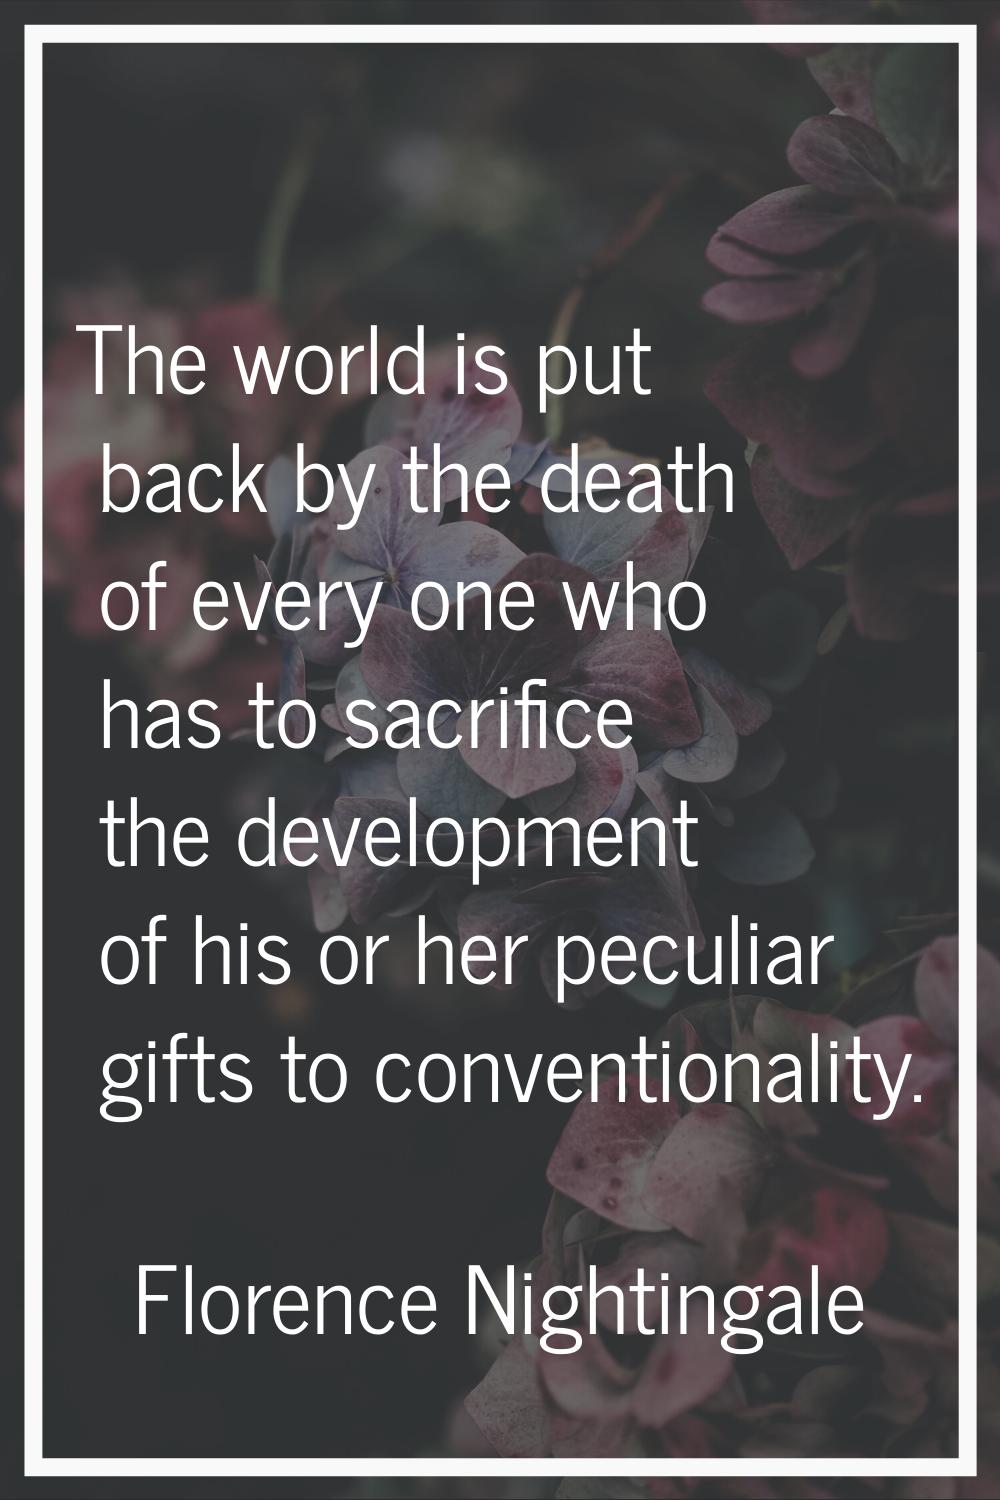 The world is put back by the death of every one who has to sacrifice the development of his or her 